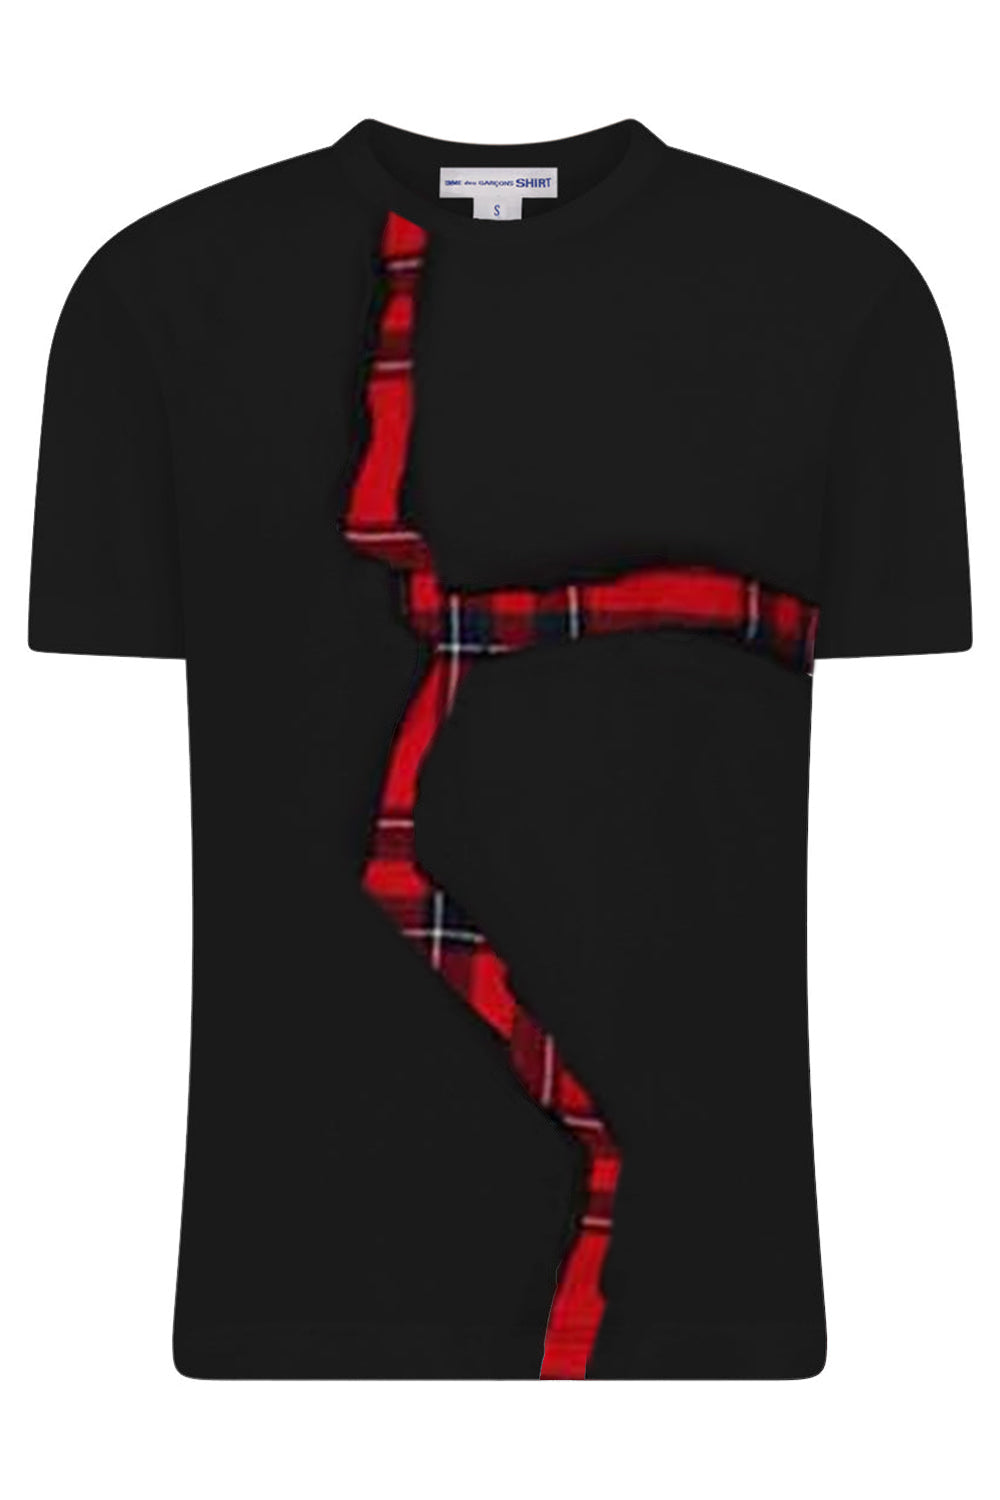 COMME DES GARCONS SHIRT RTW T-SHIRT WITH UNDERLAY RED CROSS | BLACK